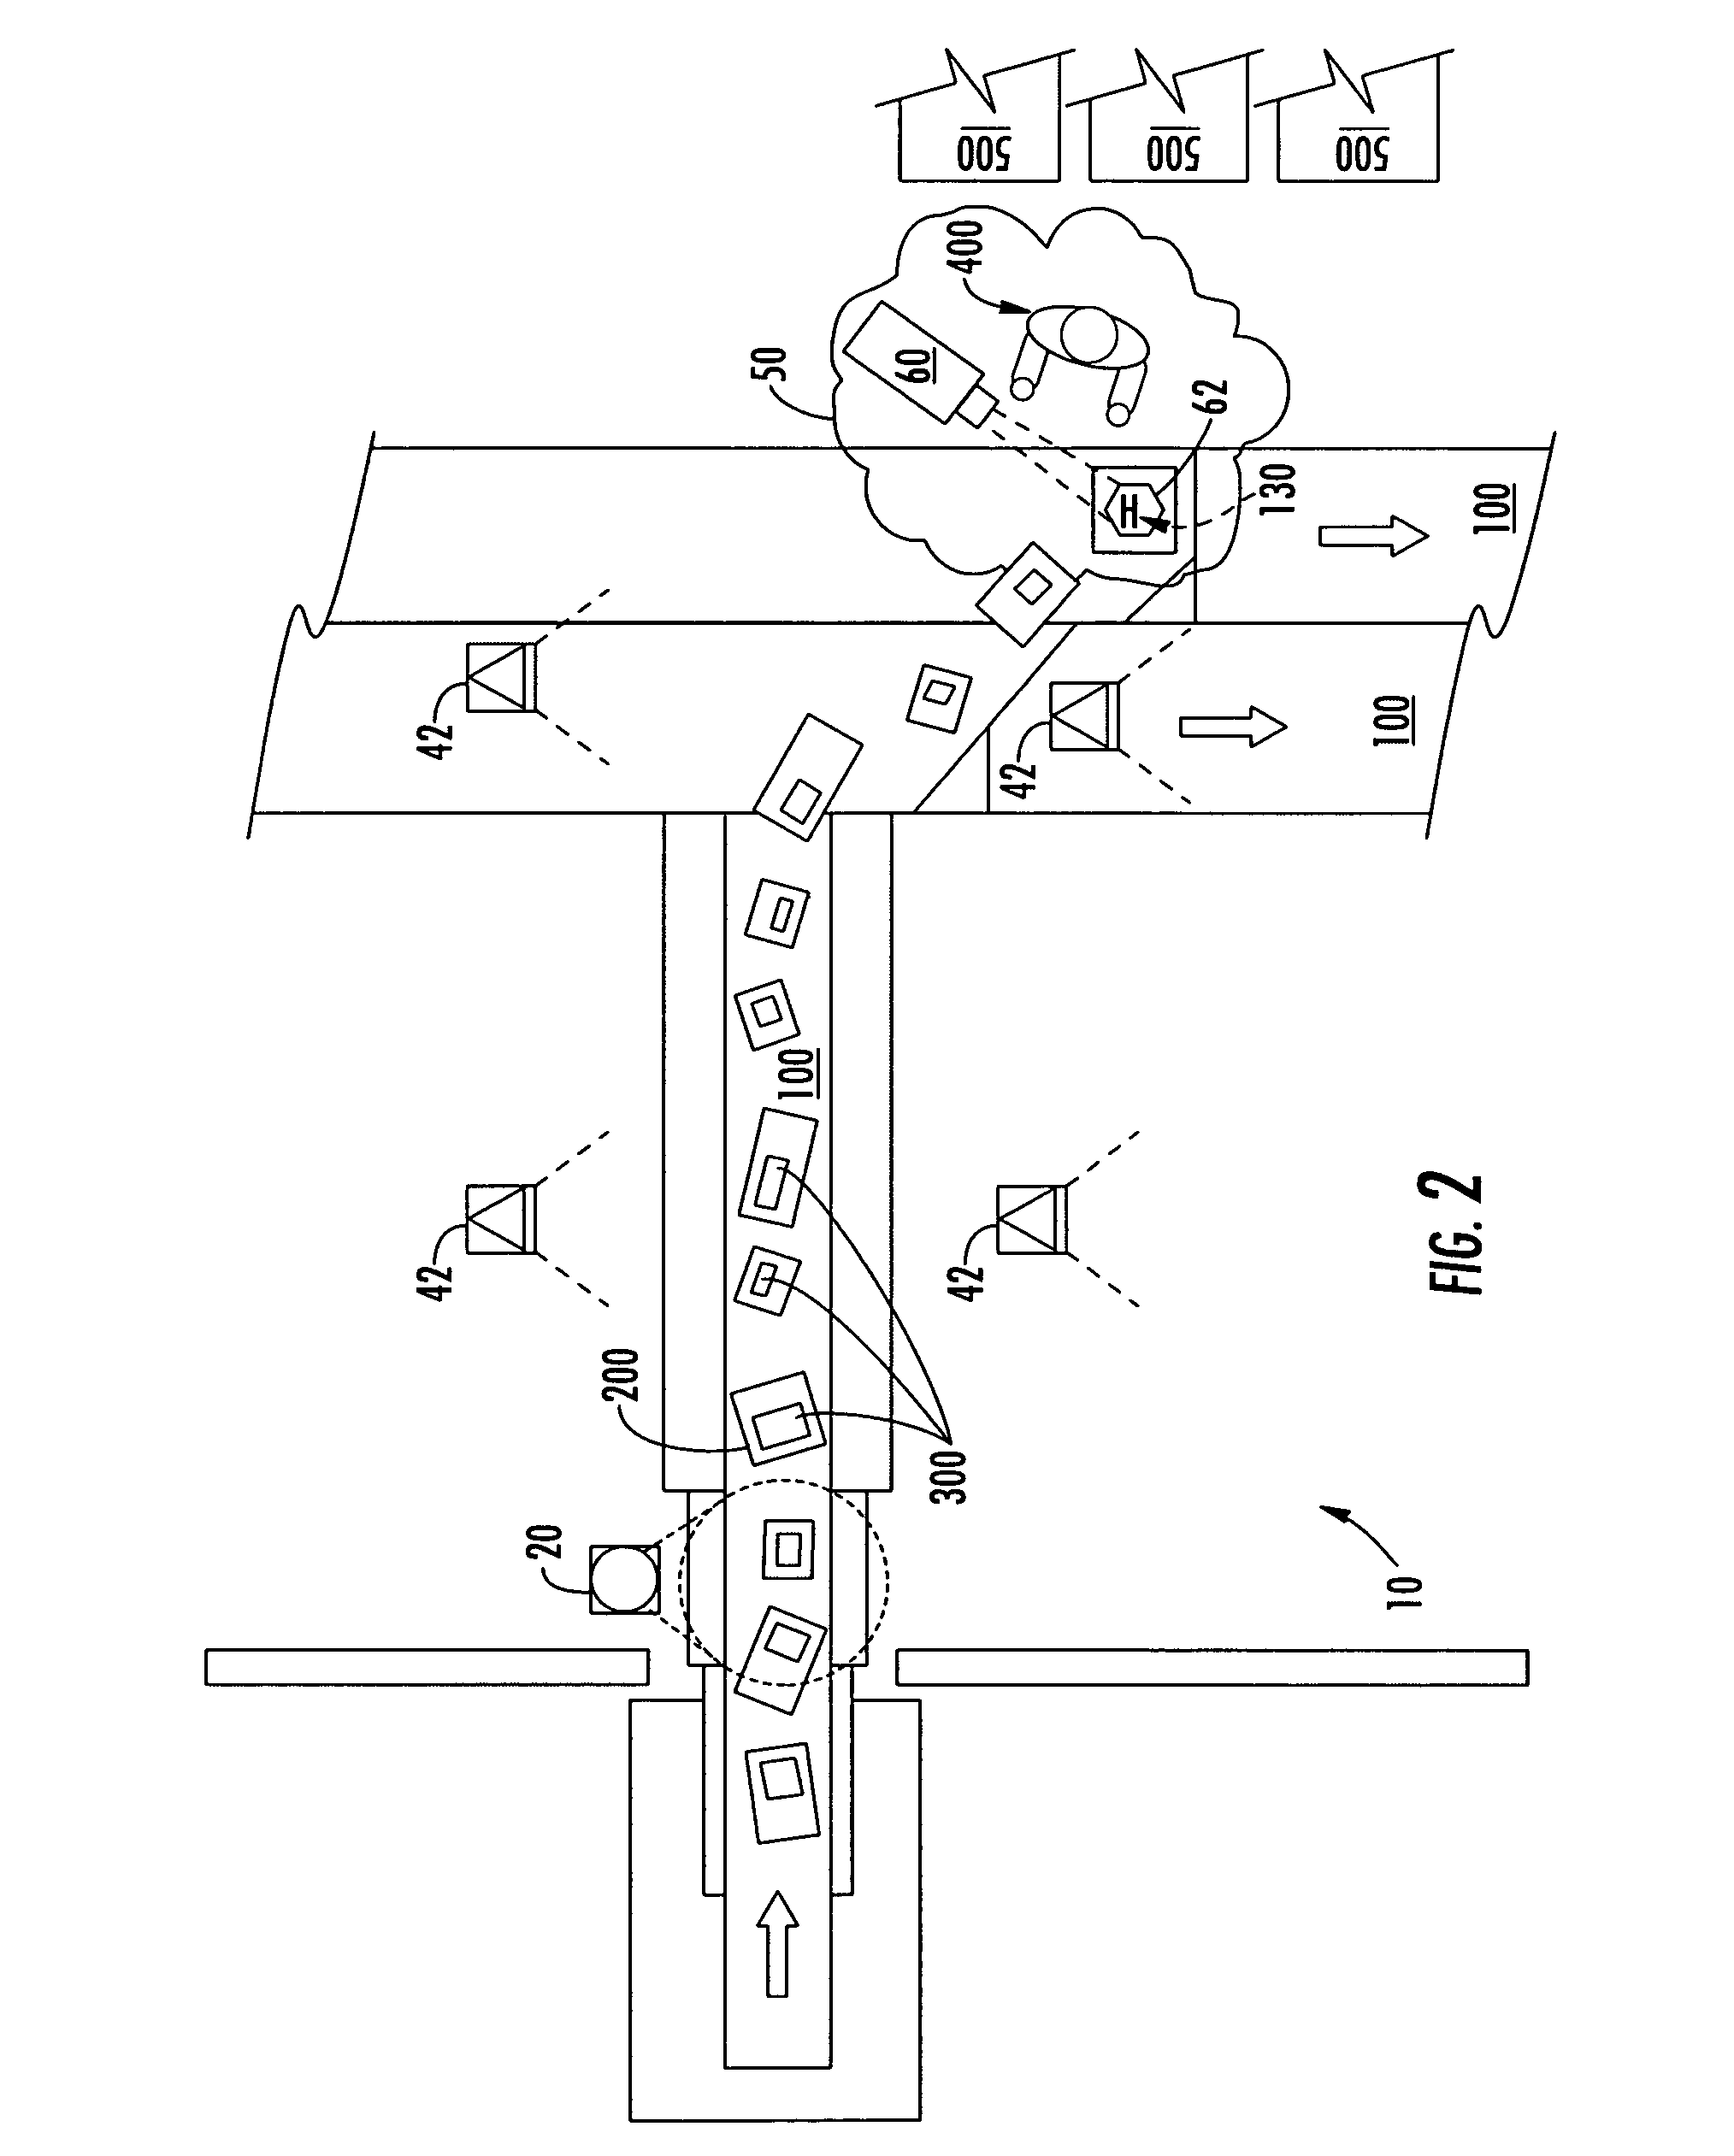 System for projecting a handling instruction onto a moving item or parcel